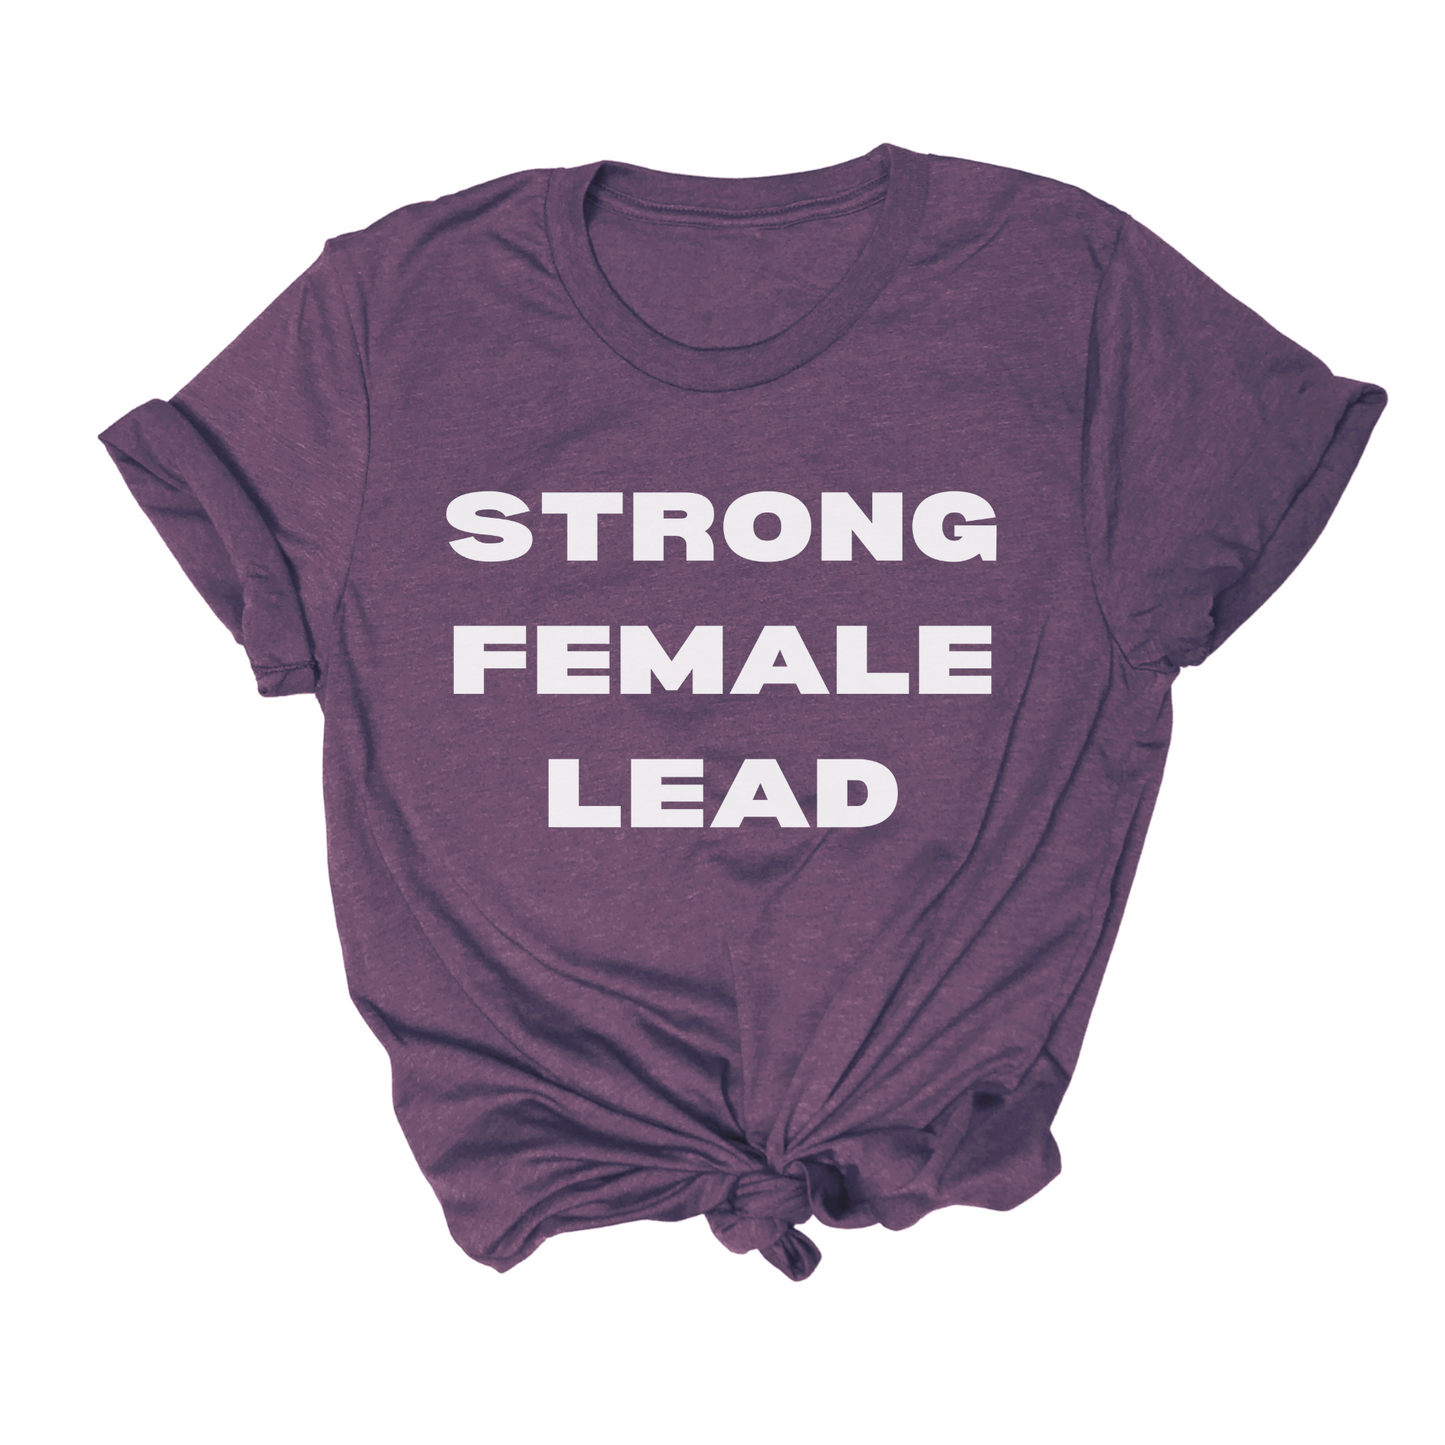 "Strong Female Lead" Tee